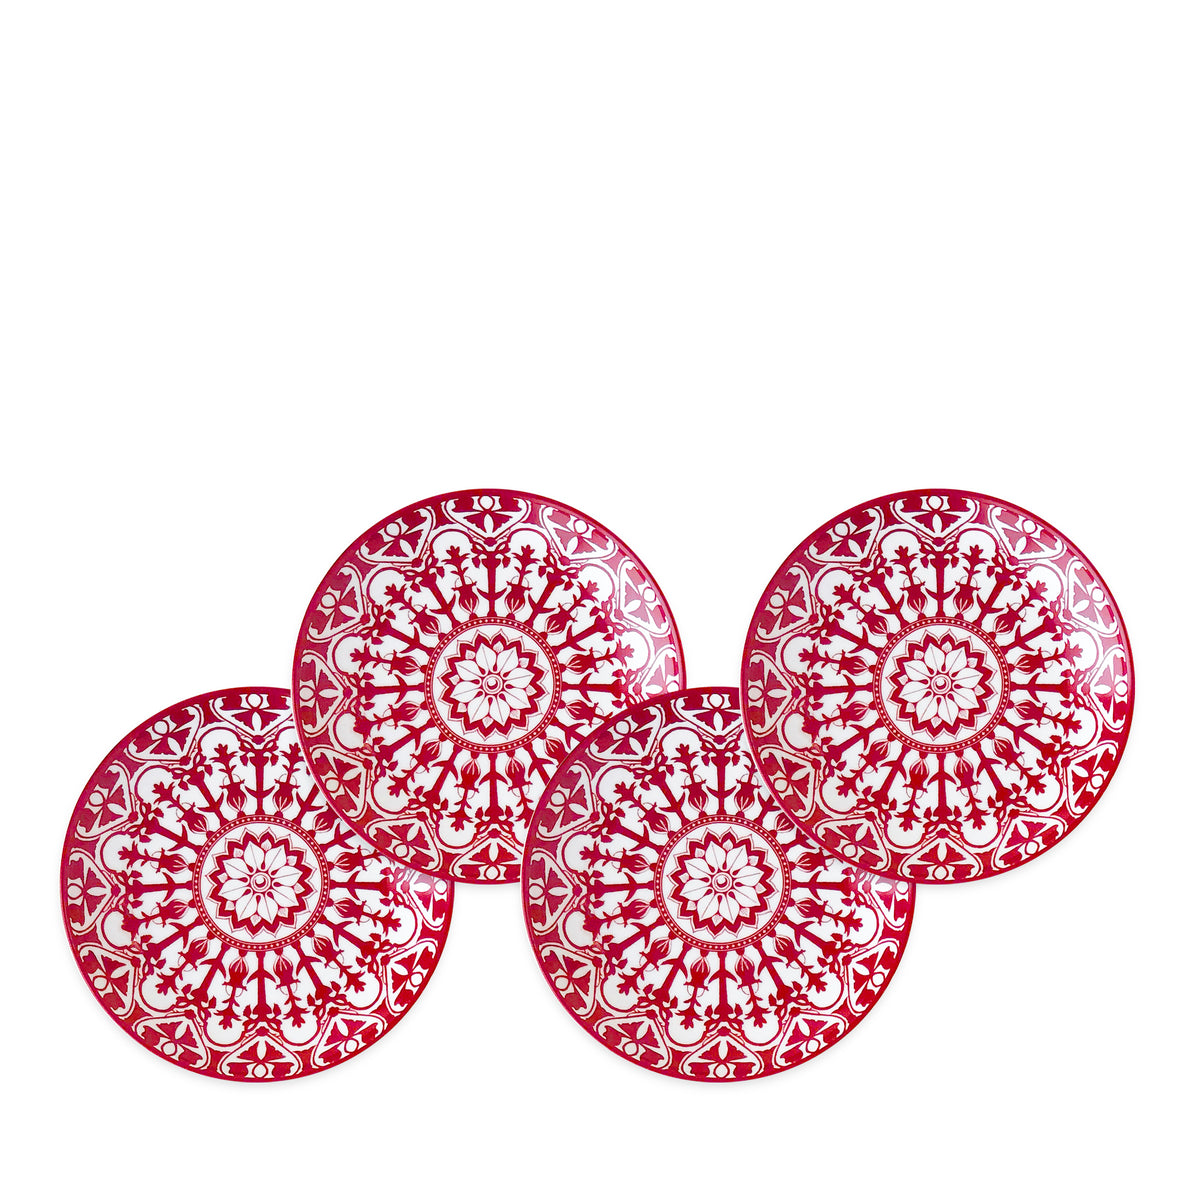 Four round plates with intricate red and white floral patterns, reminiscent of heirloom-quality **Caskata Artisanal Home&#39;s Casablanca Crimson Small Plates**, are arranged together.